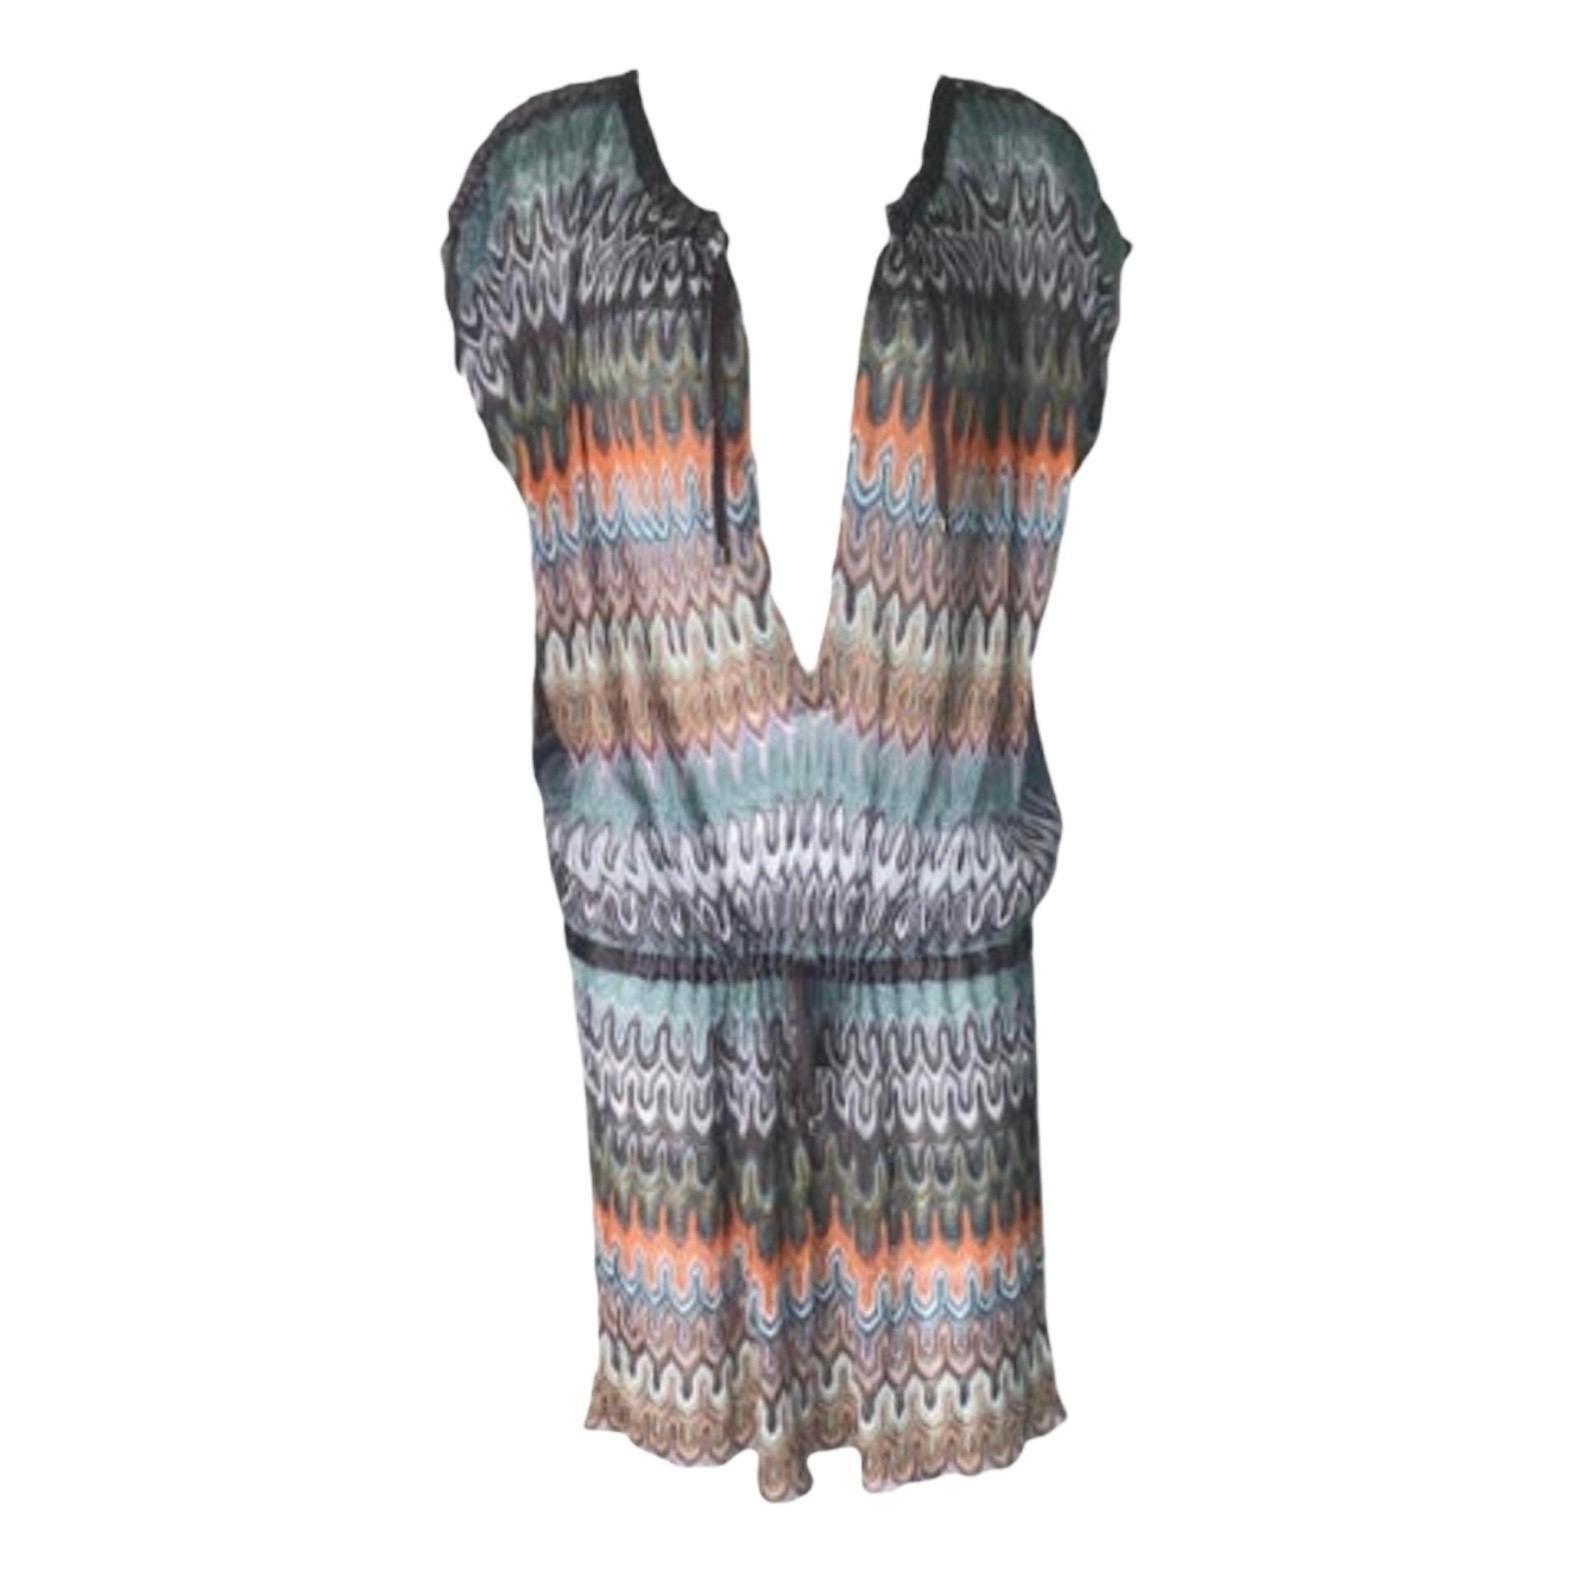 Missoni's multicolored zig-zag crochet-knit tunic with gathered waist perfectly embodies bohemian luxe style. Layer it over a slip with a hat and leg-lengthening wedge heels for a chic vacation look.

This colorful Missoni signature crochet-knit